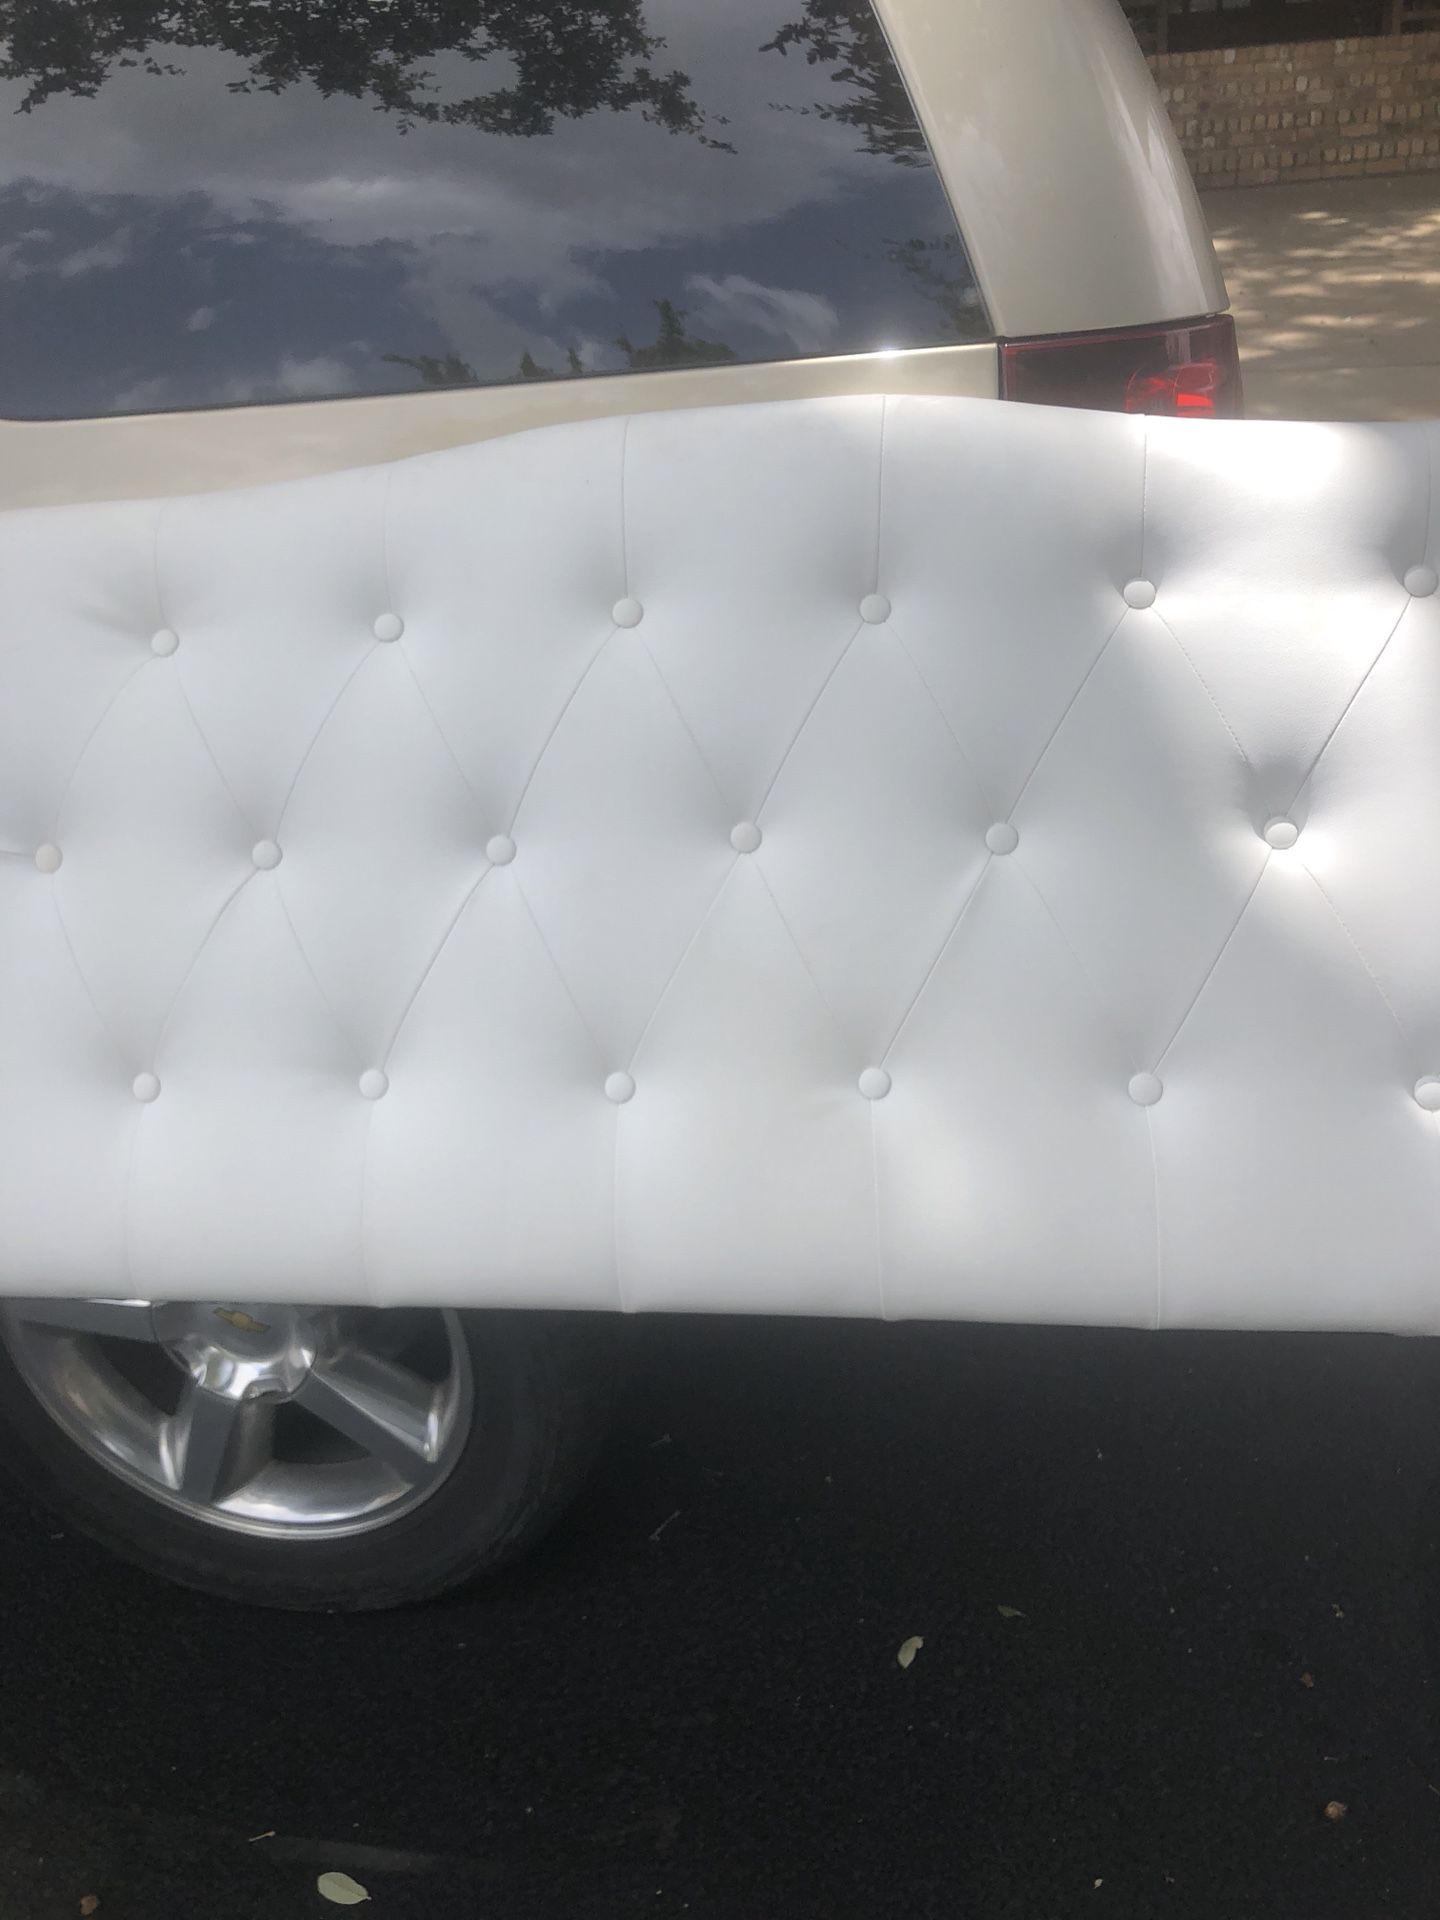 White 55” headboard - $50 obo or will trade for a used wooden or cloth queen sized headboard